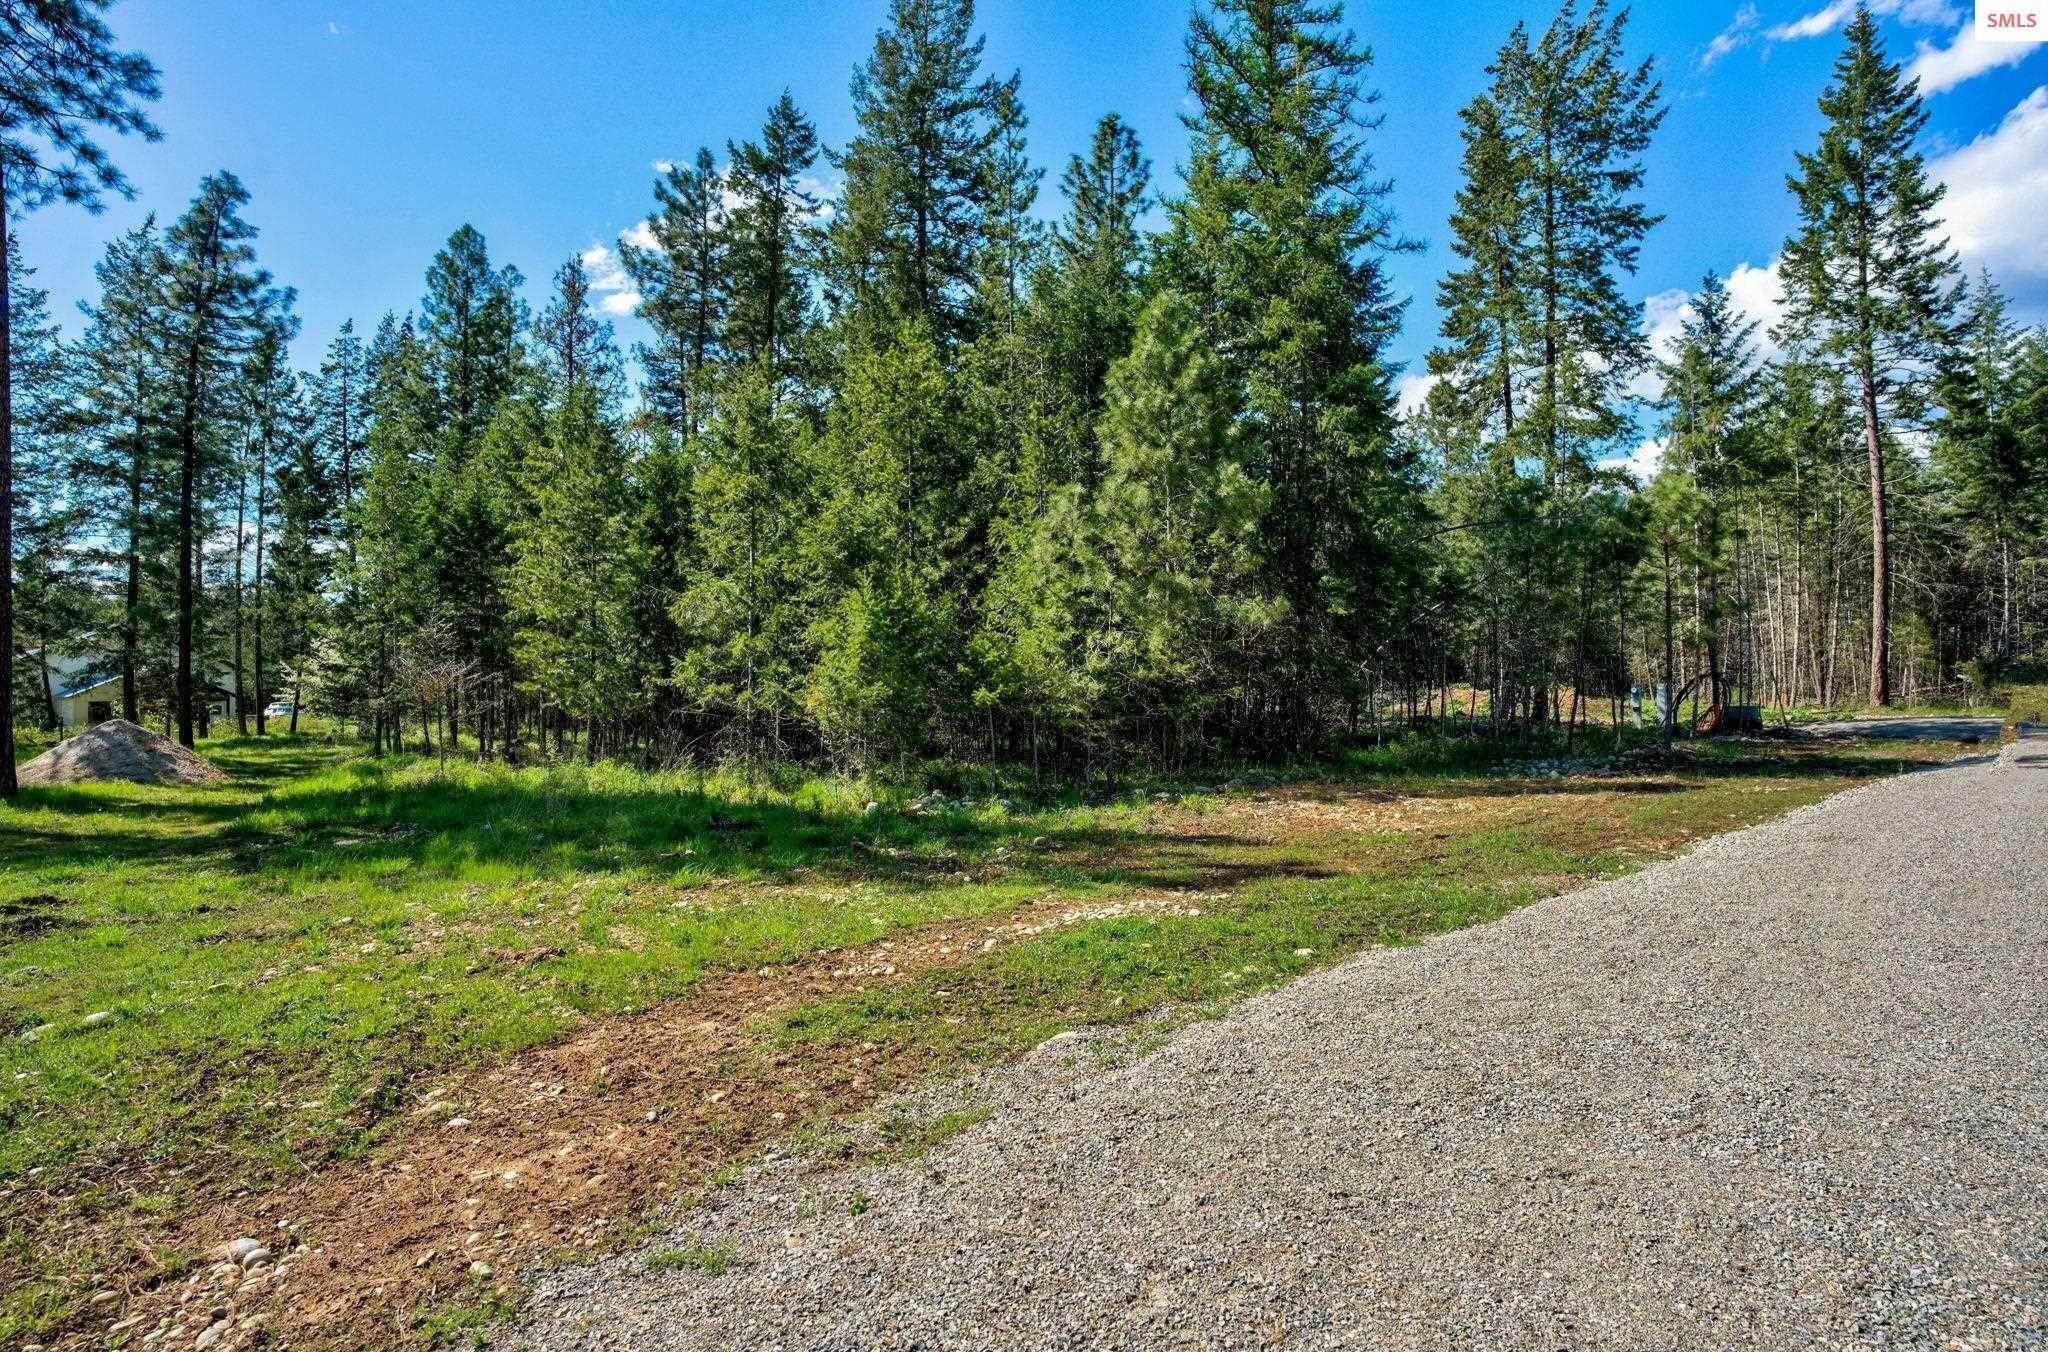 6. Land for Sale at NNA Pacific Place LOT 3 Moyie Springs, Idaho 83845 United States